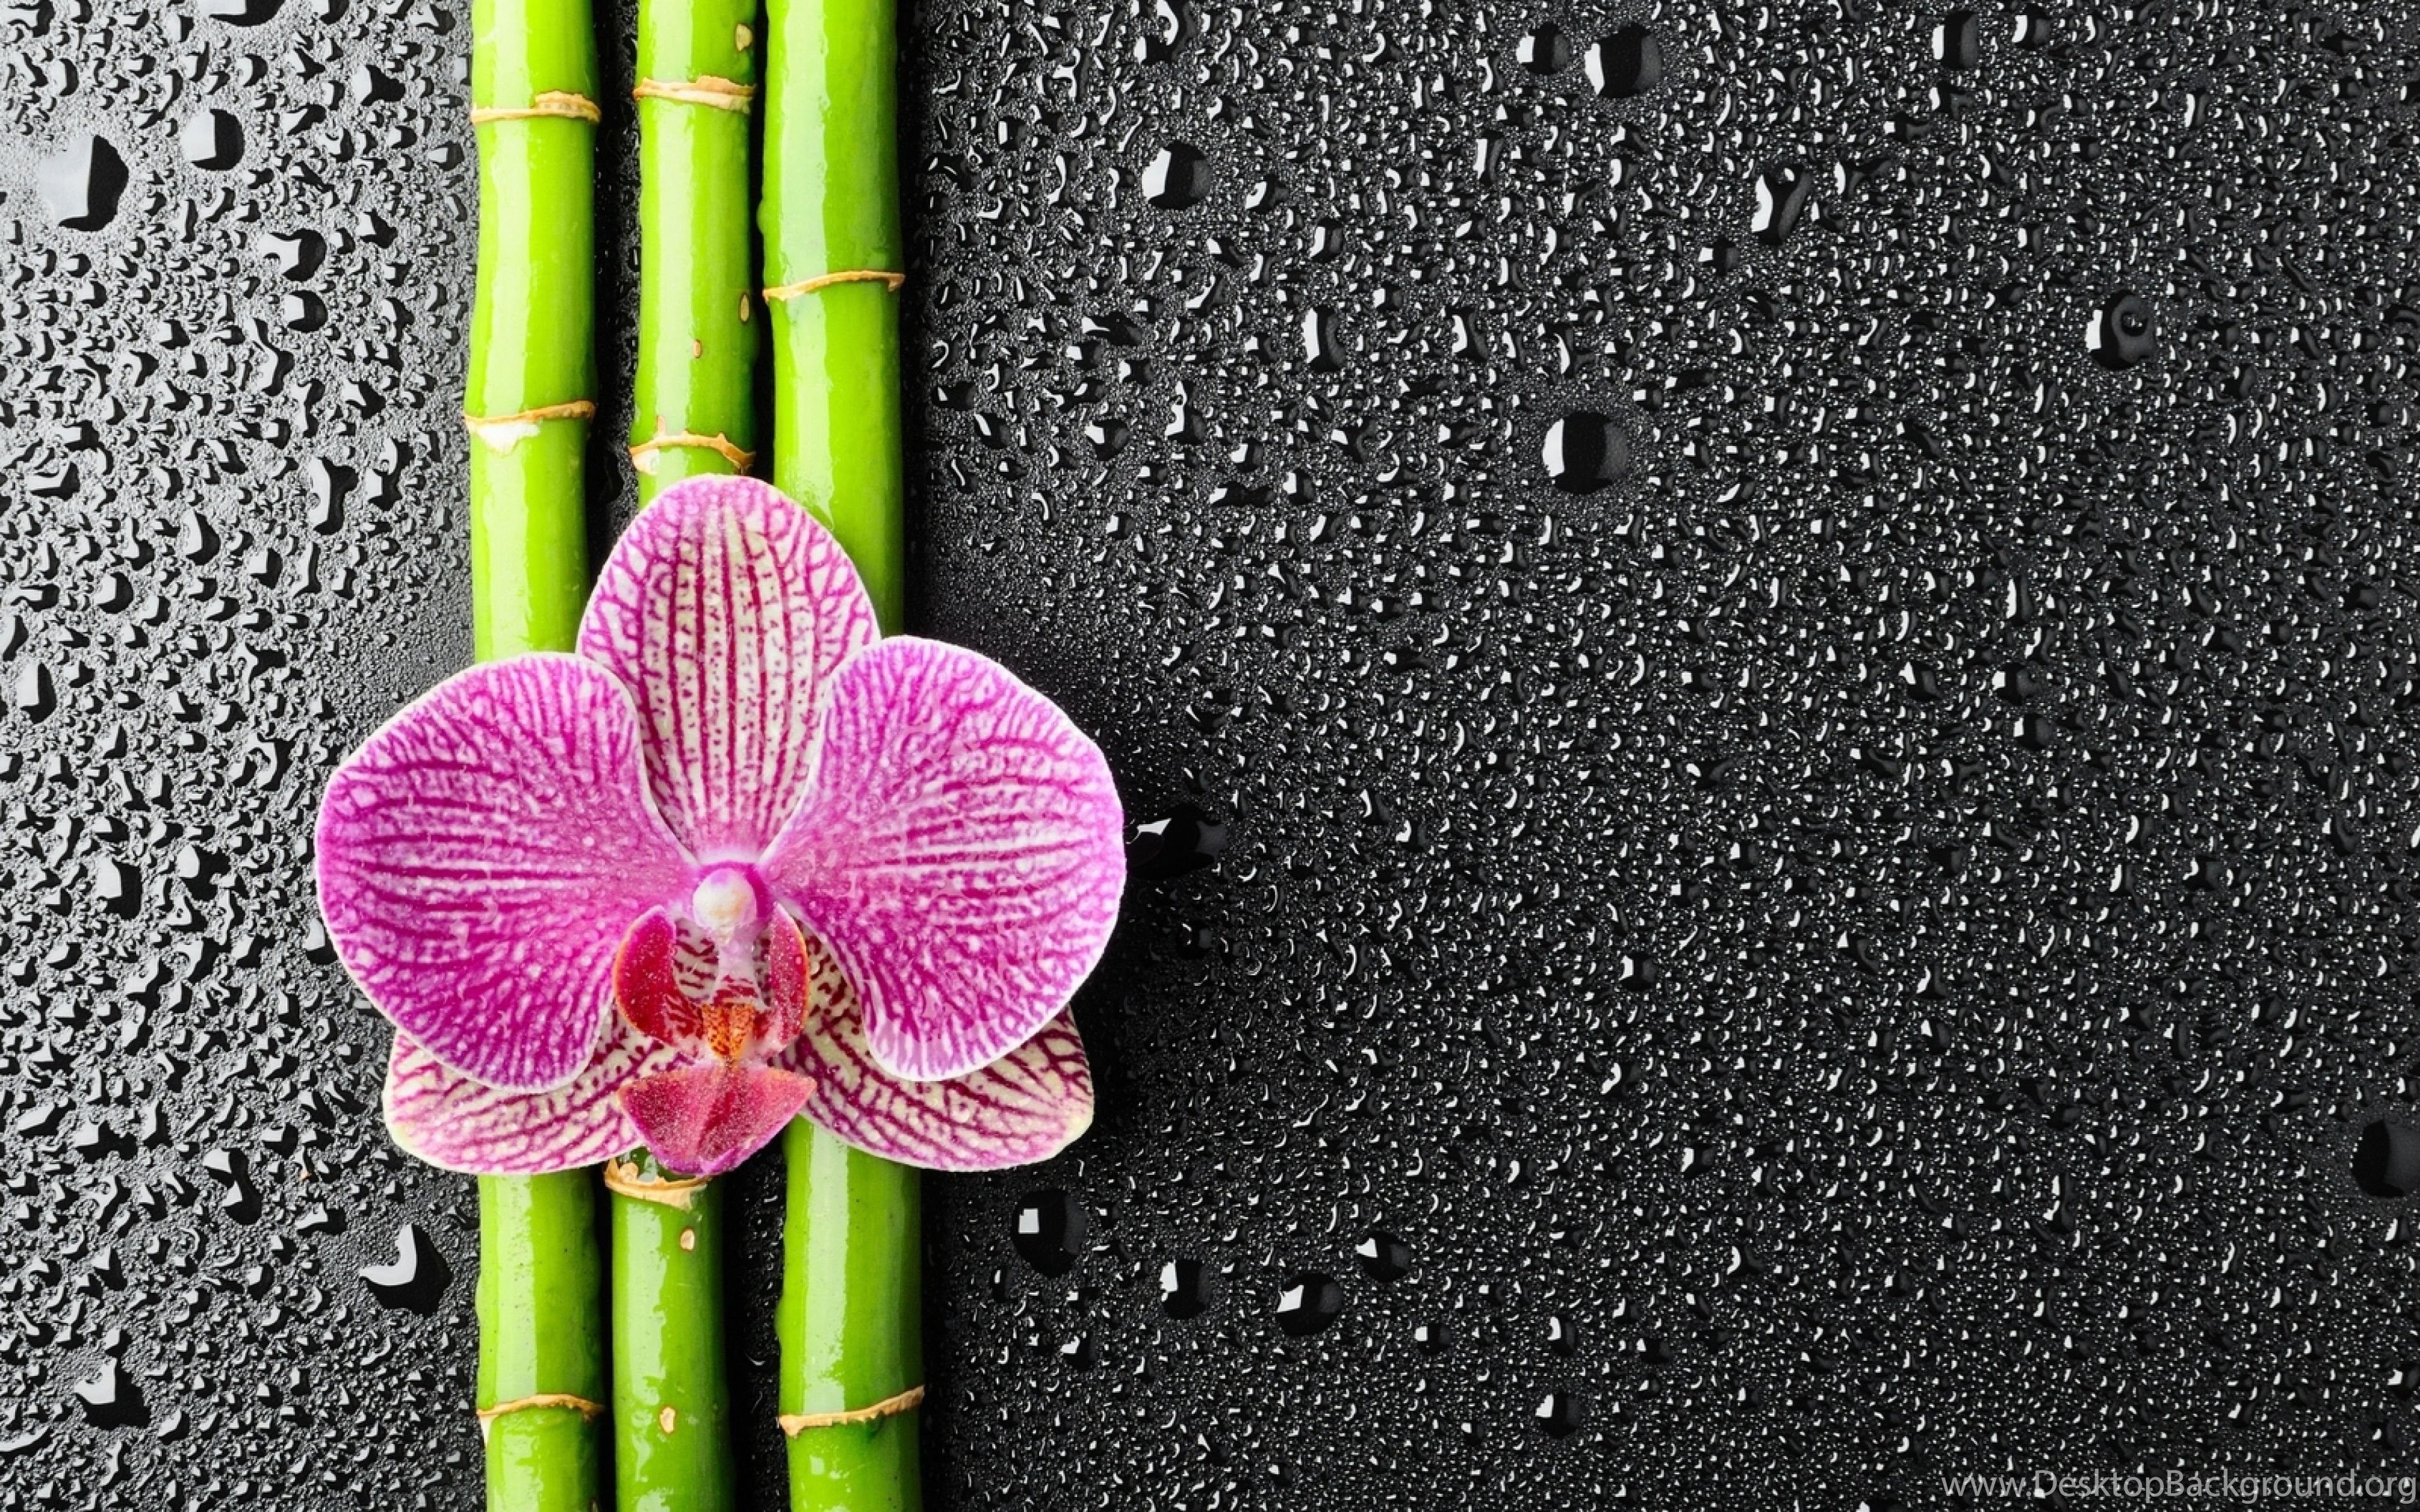 Download Wallpaper 3840x2400 Orchid, Flower, Bamboo, Drops Ultra